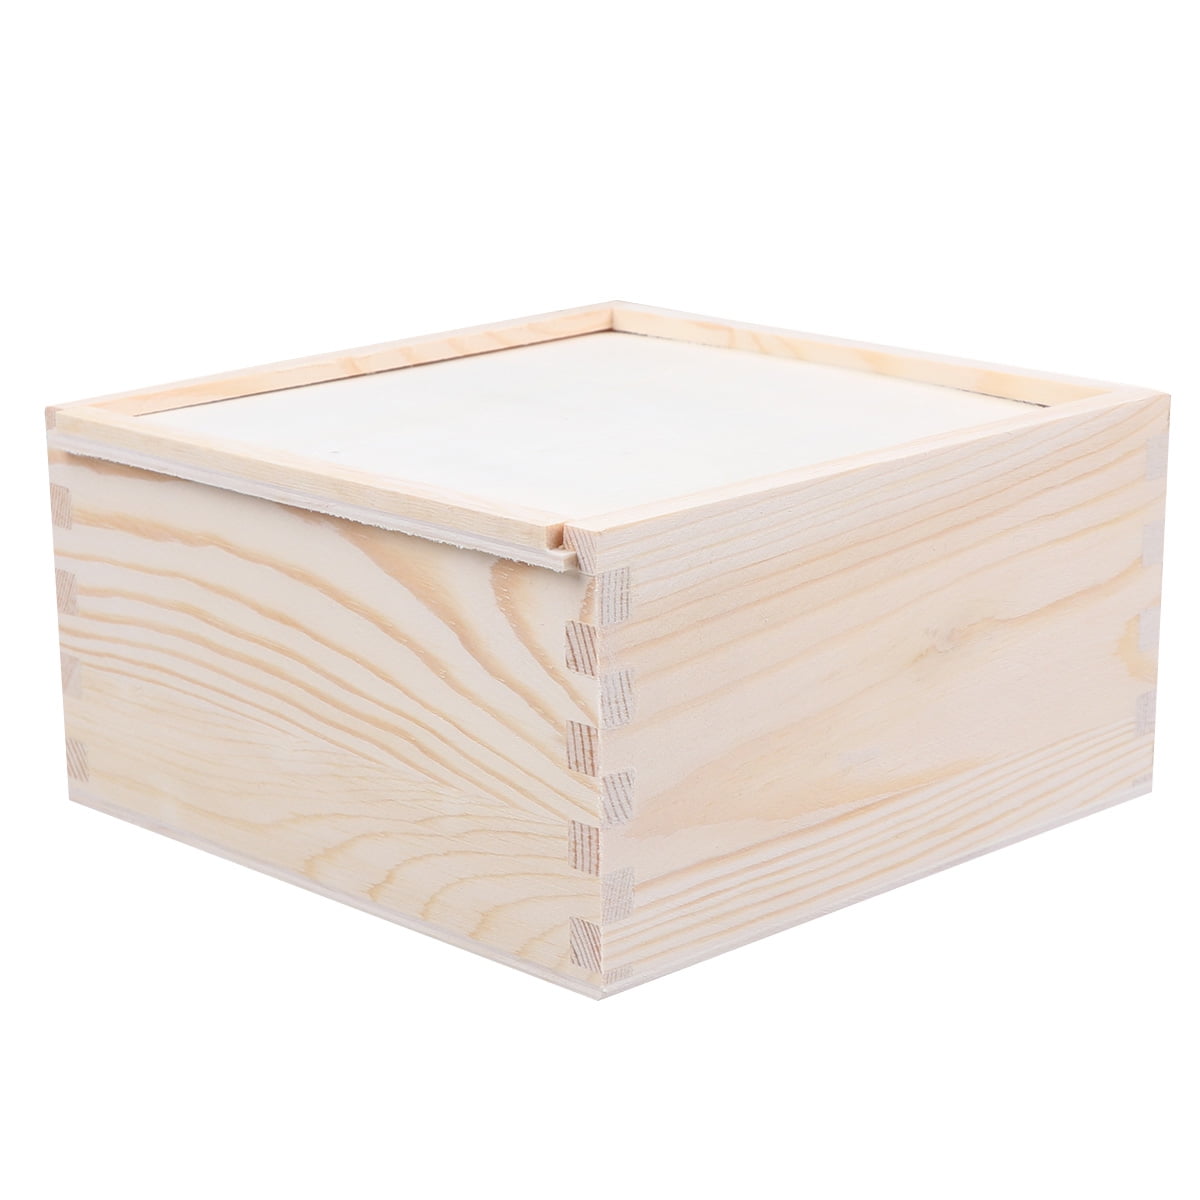 WOODEN BOX WHIT SLIDING LID 29 x 19 x 5.2 cm FOR PHOTOS AND PEN DRIVE 